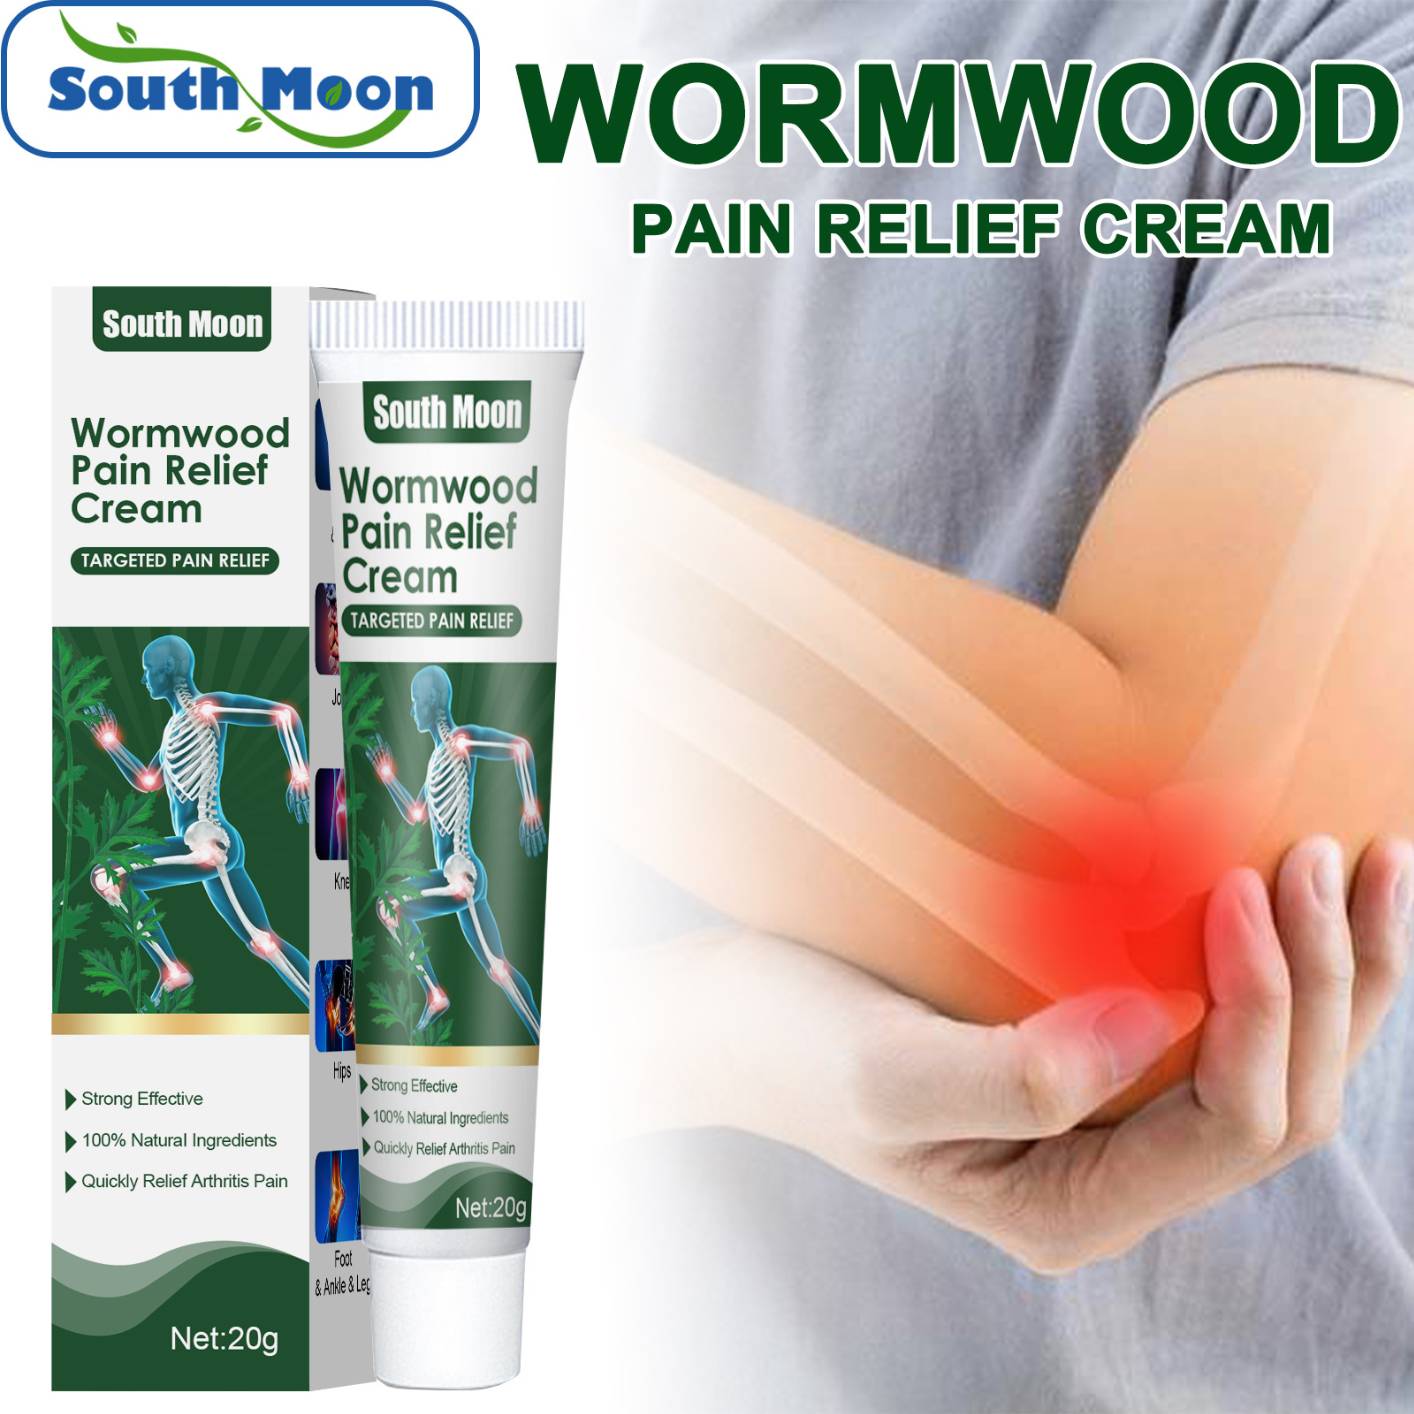 Rub on Relief Fast Acting Pain and Ache Relief Natural Cream for Muscles, Neck, Back, Joints, Knees, Arthritis and Shoulder Pain Relief